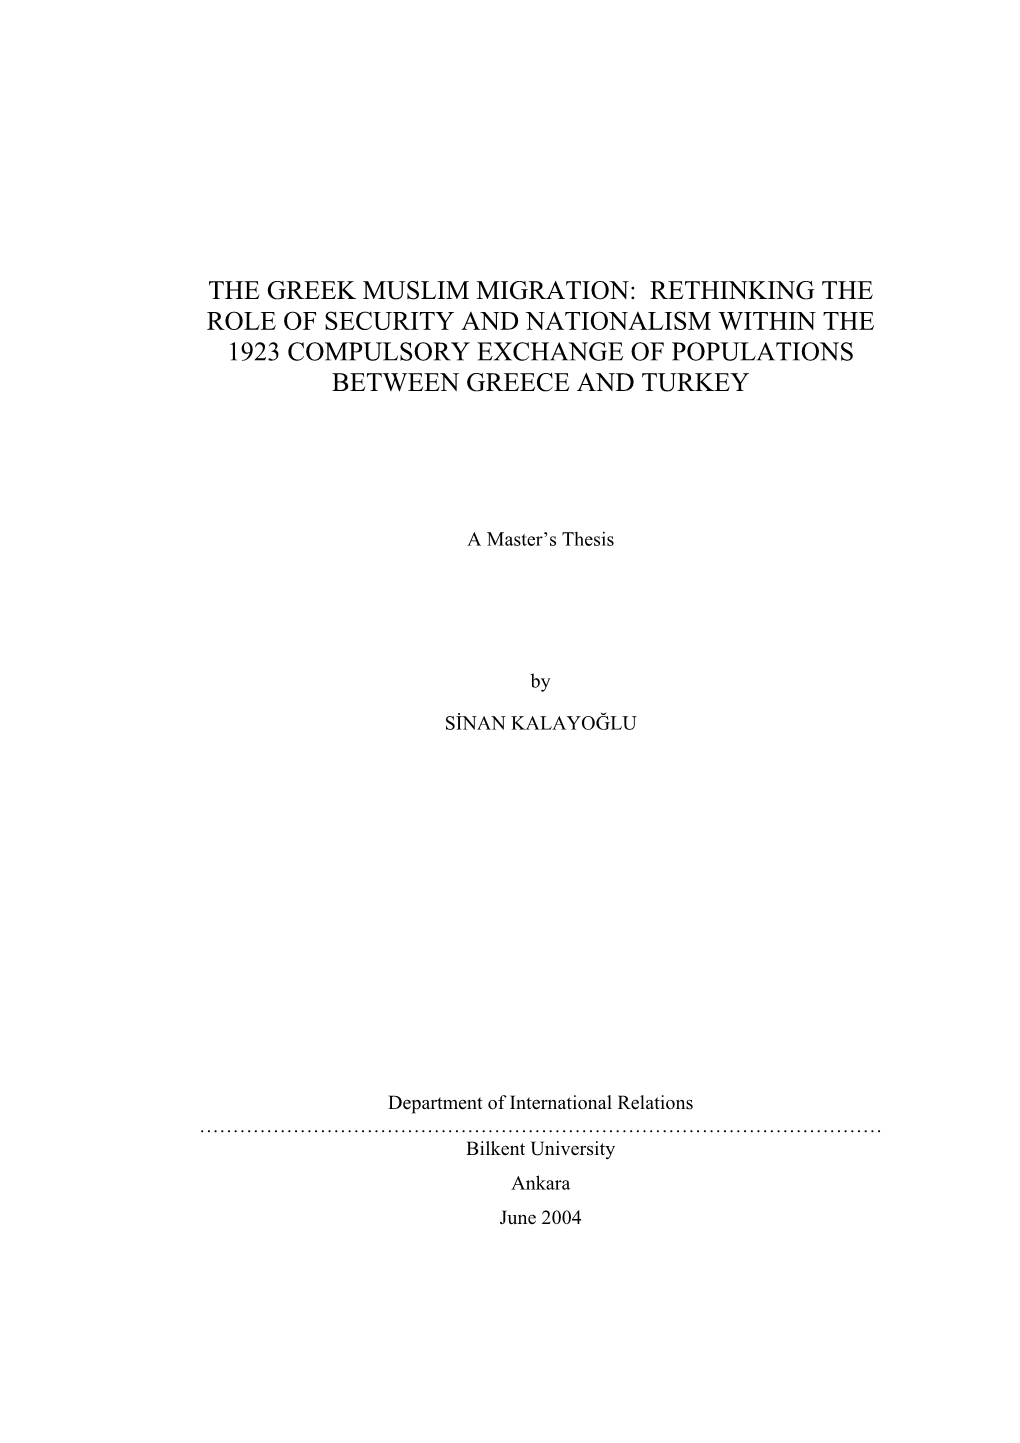 The Greek Muslim Migration: Rethinking the Role of Security and Nationalism Within the 1923 Compulsory Exchange of Populations Between Greece and Turkey